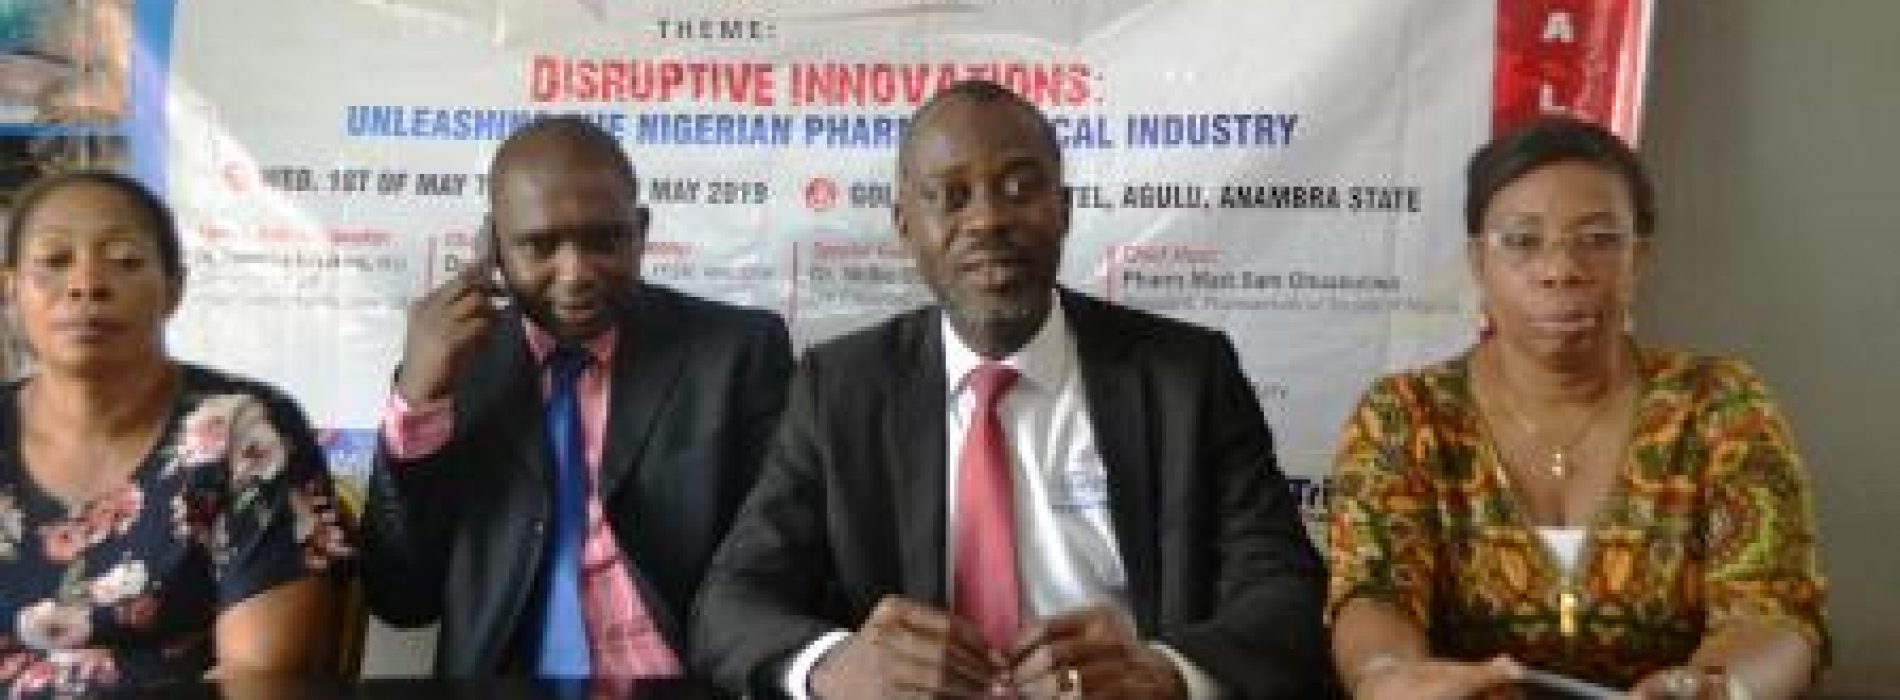 NAIP urges FG to build pharmaceutical production plants  